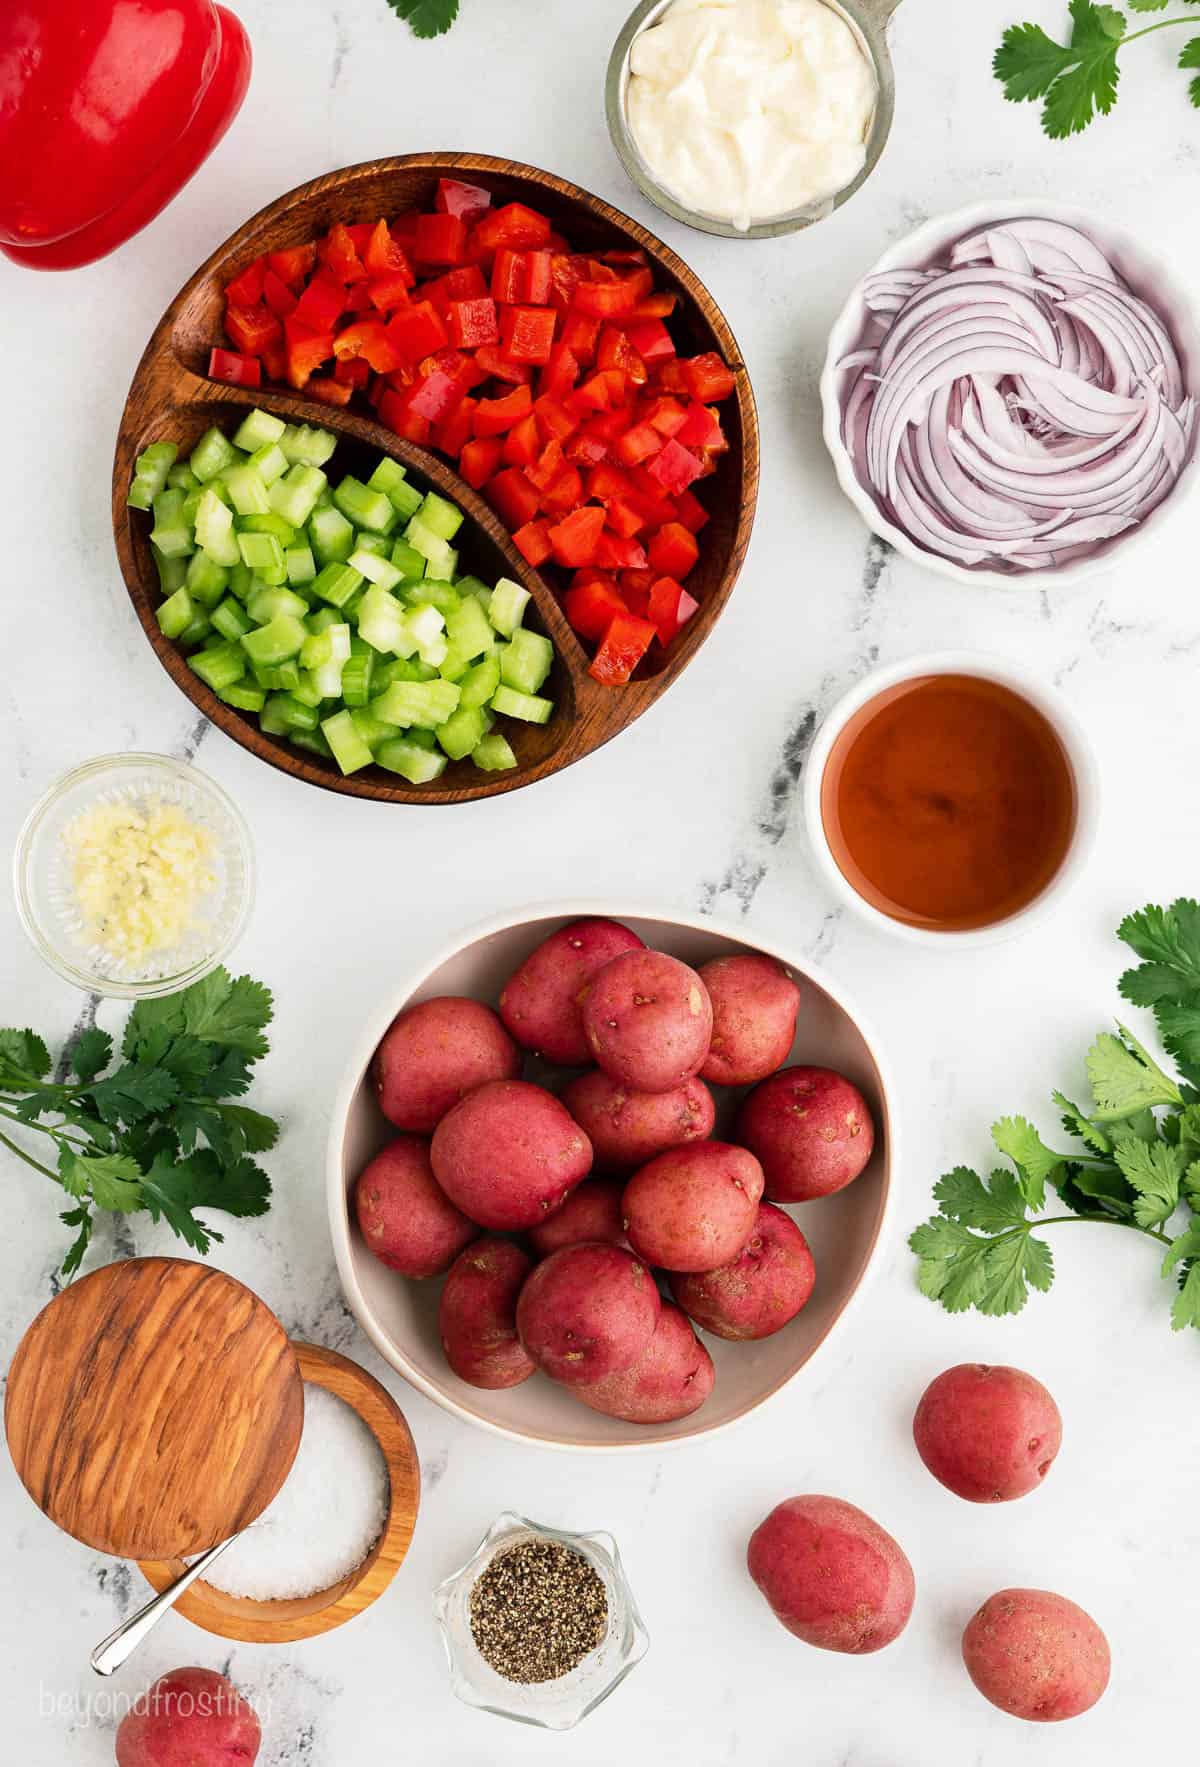 Overhead view of red potato salad ingredients